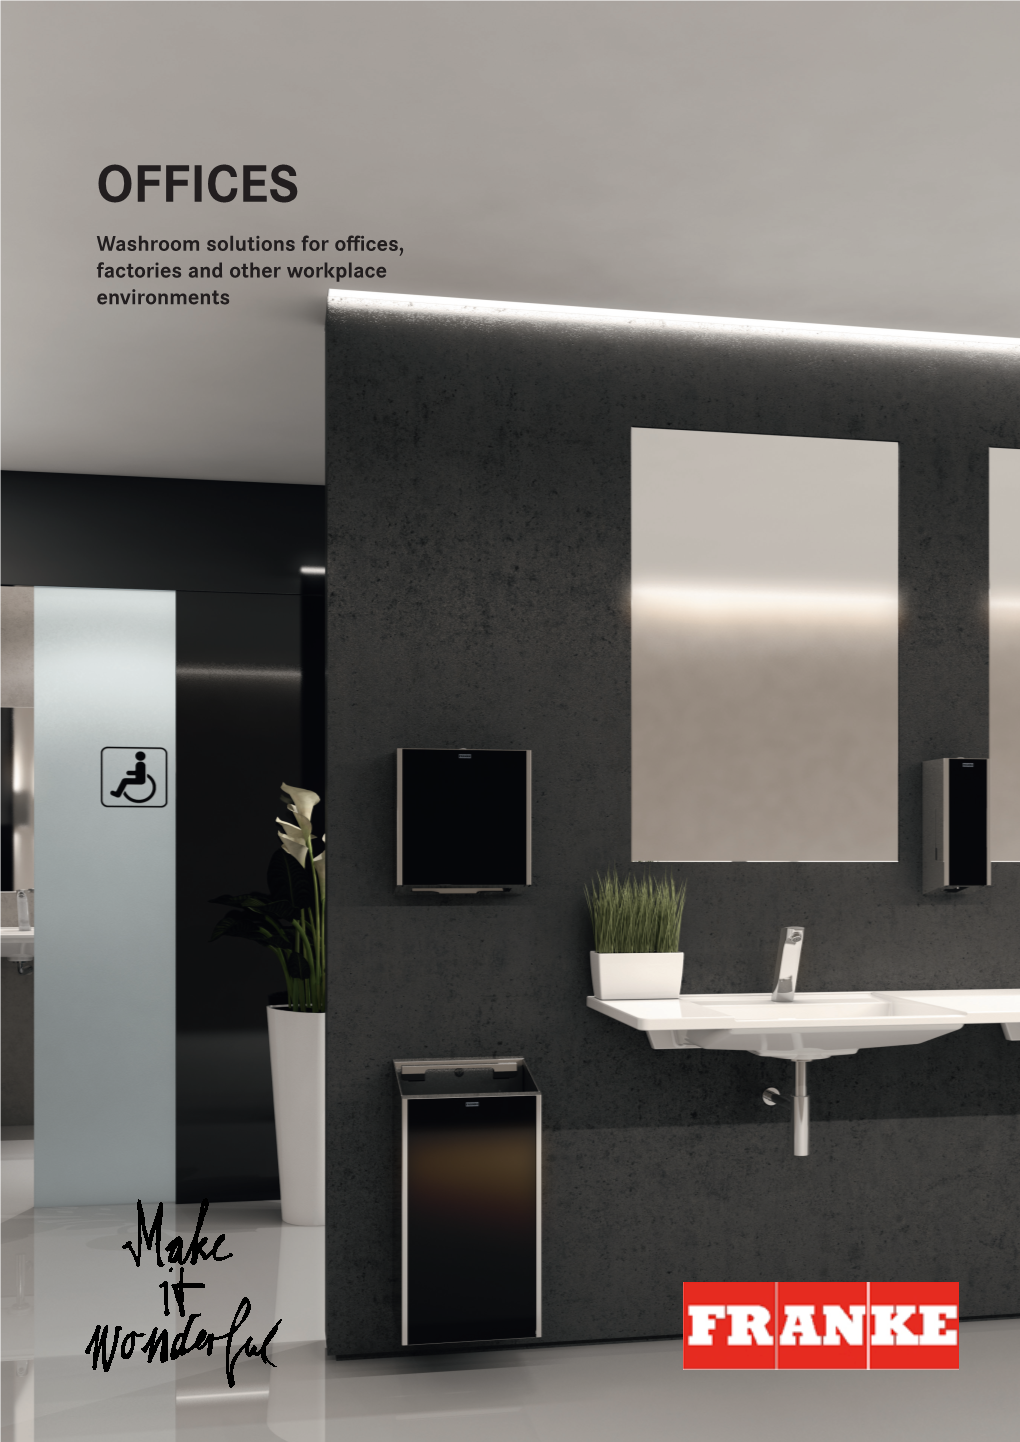 OFFICES Washroom Solutions for Offices, Factories and Other Workplace Environments